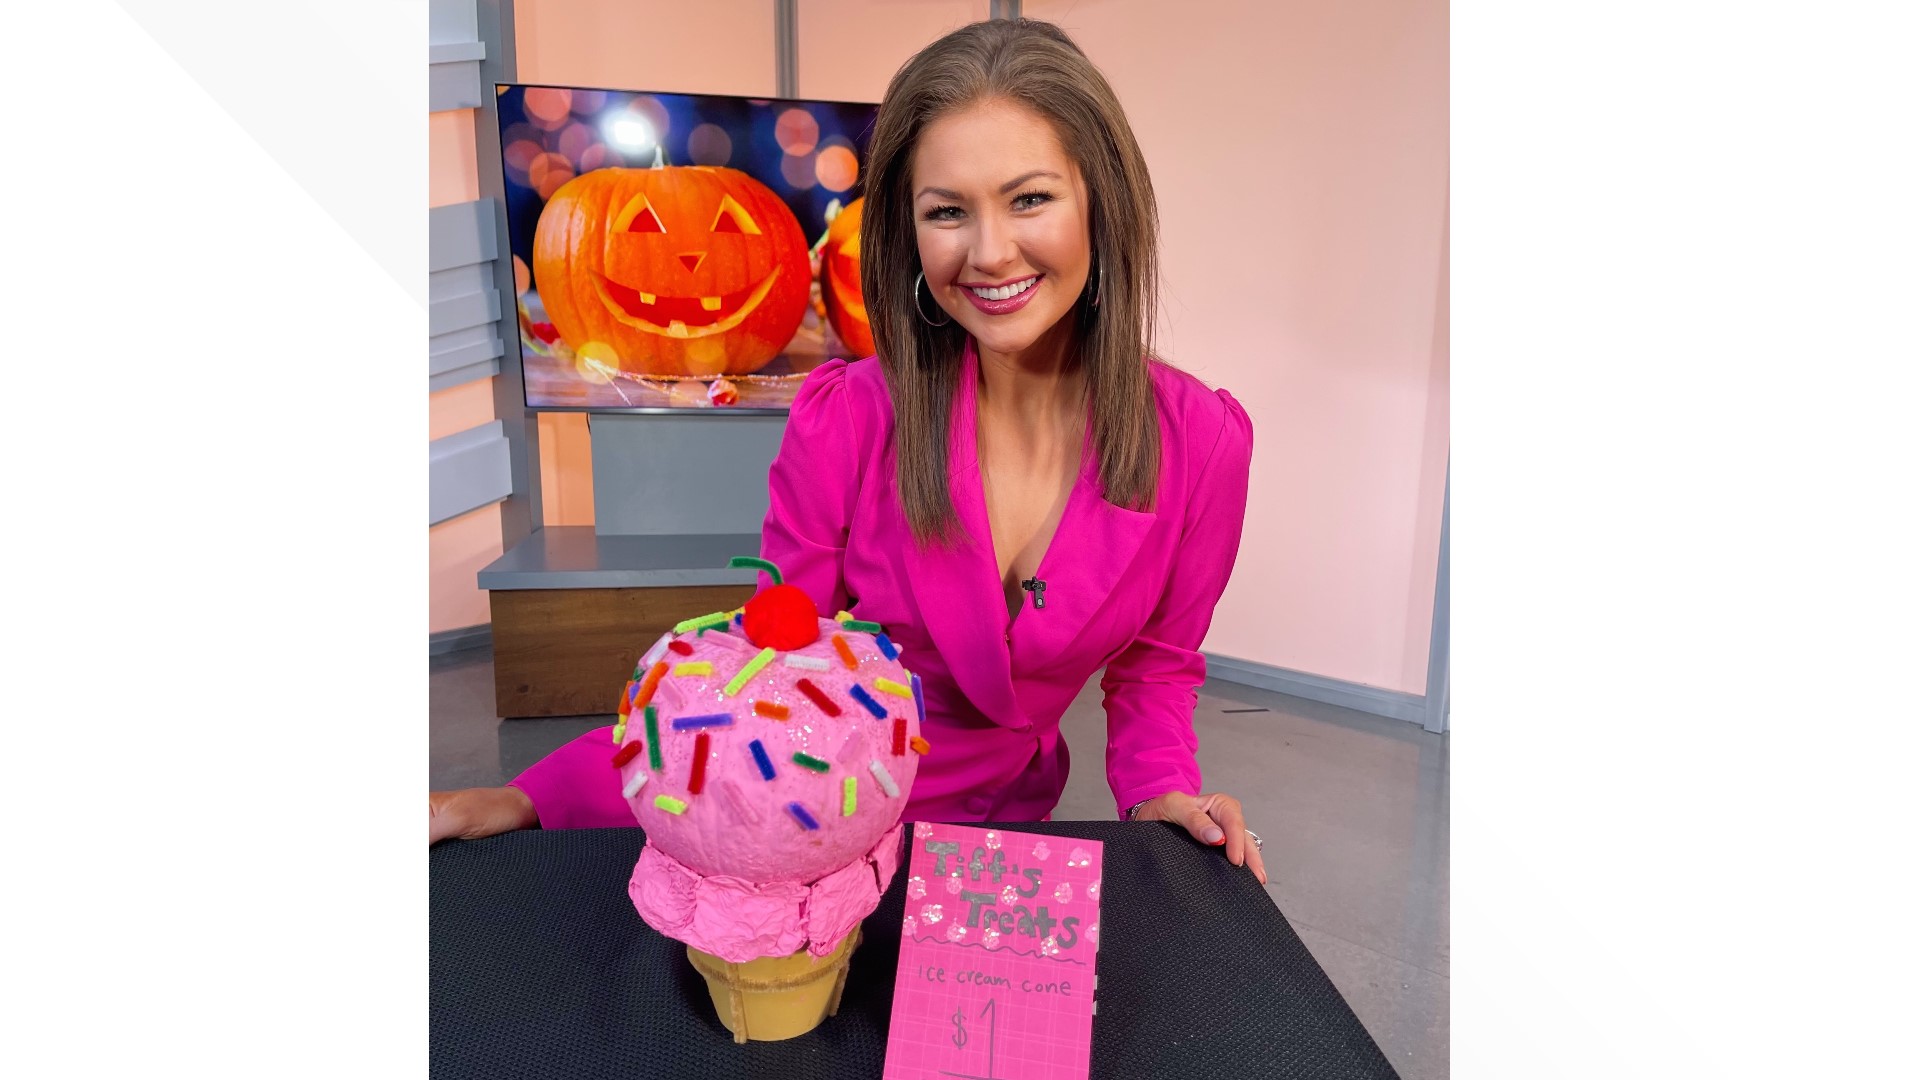 Tiffany Lee reveals her pumpkin for the 2022 5NEWS Pumpkin Carving Contest